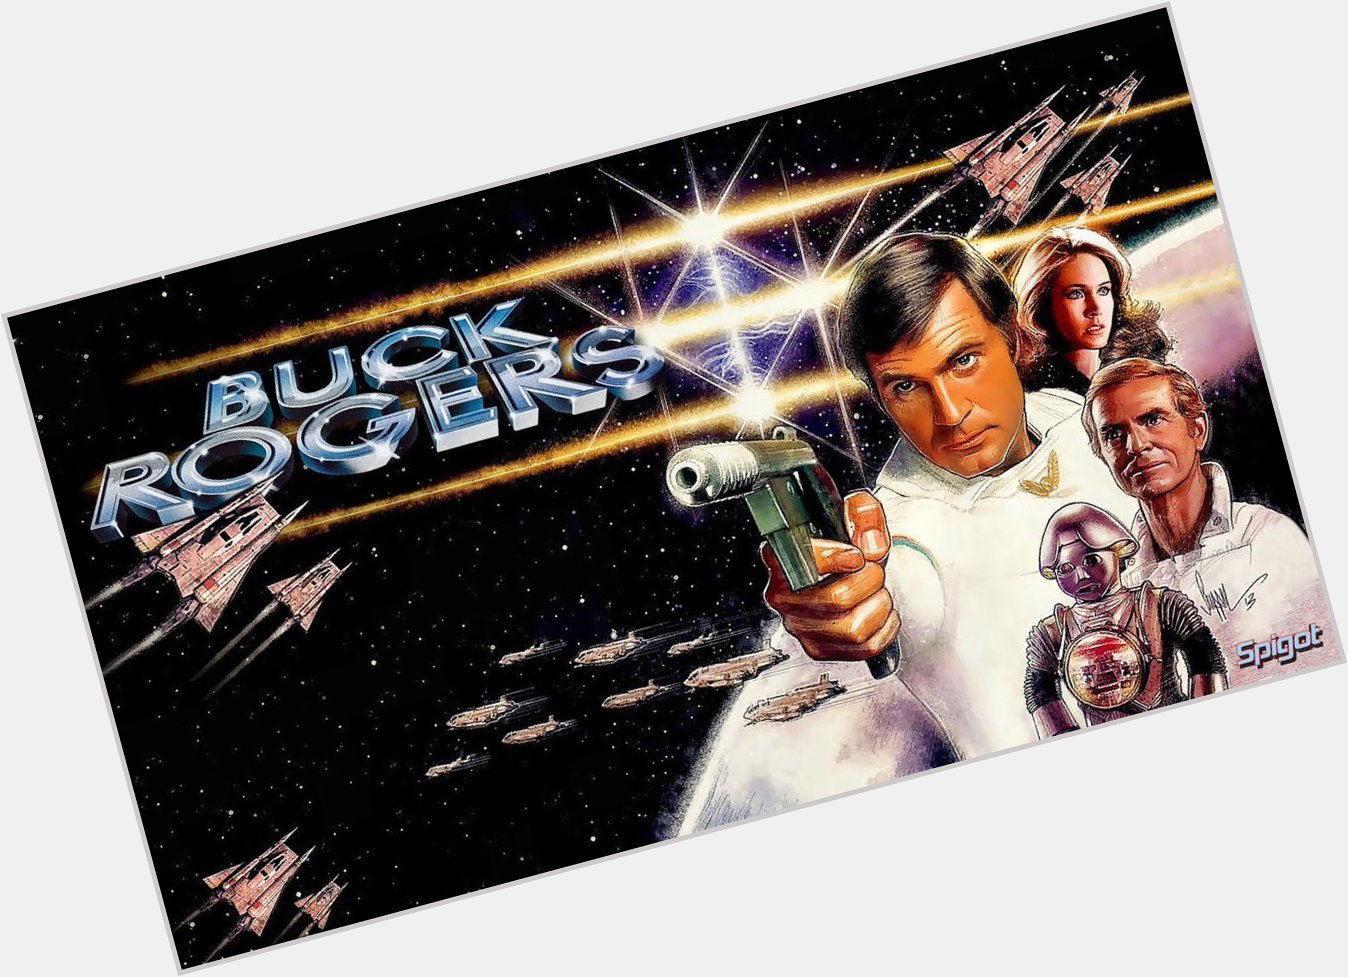 Just learned that Gil Gerard turned 76 year old yesterday. Happy belated birthday Buck Rogers! 